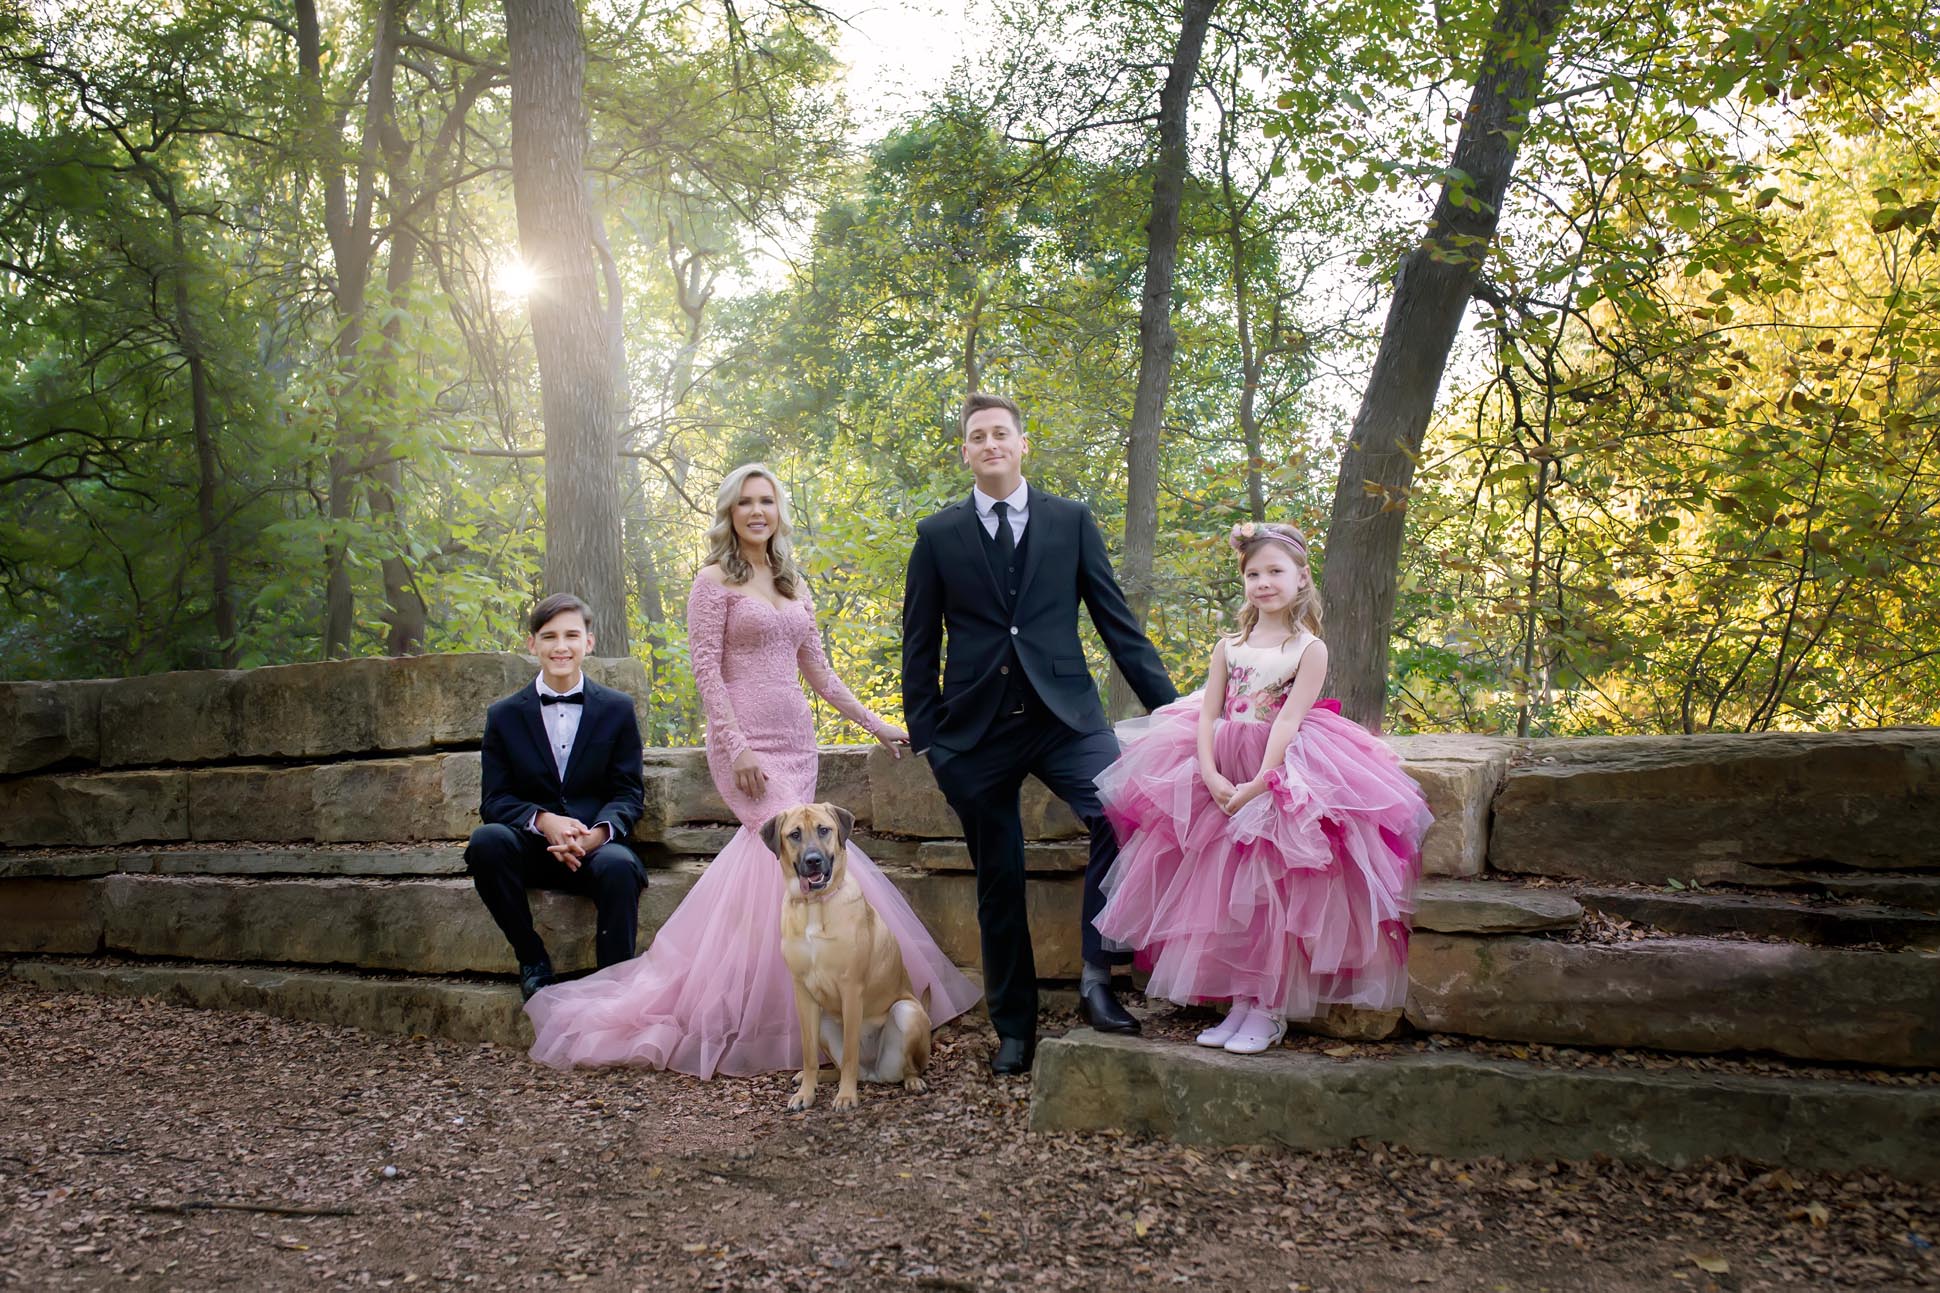 Dallas family photographer shares portrait of family in wooded area at Prairie Creek Park in Richardson Texas dressed in formal wear